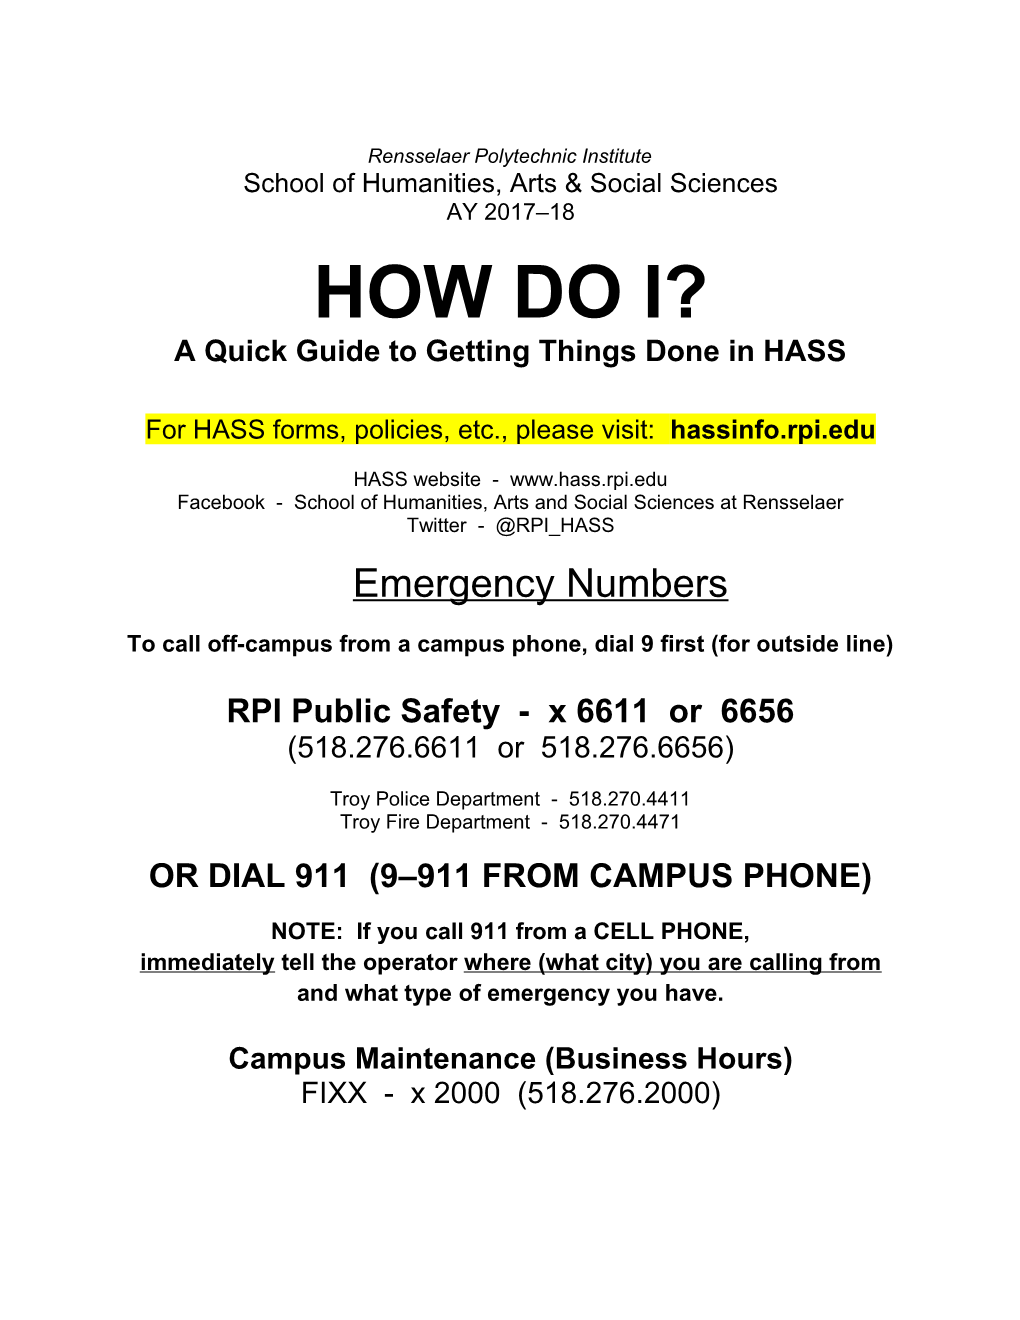 A Quick Guide to Getting Things Done in HASS